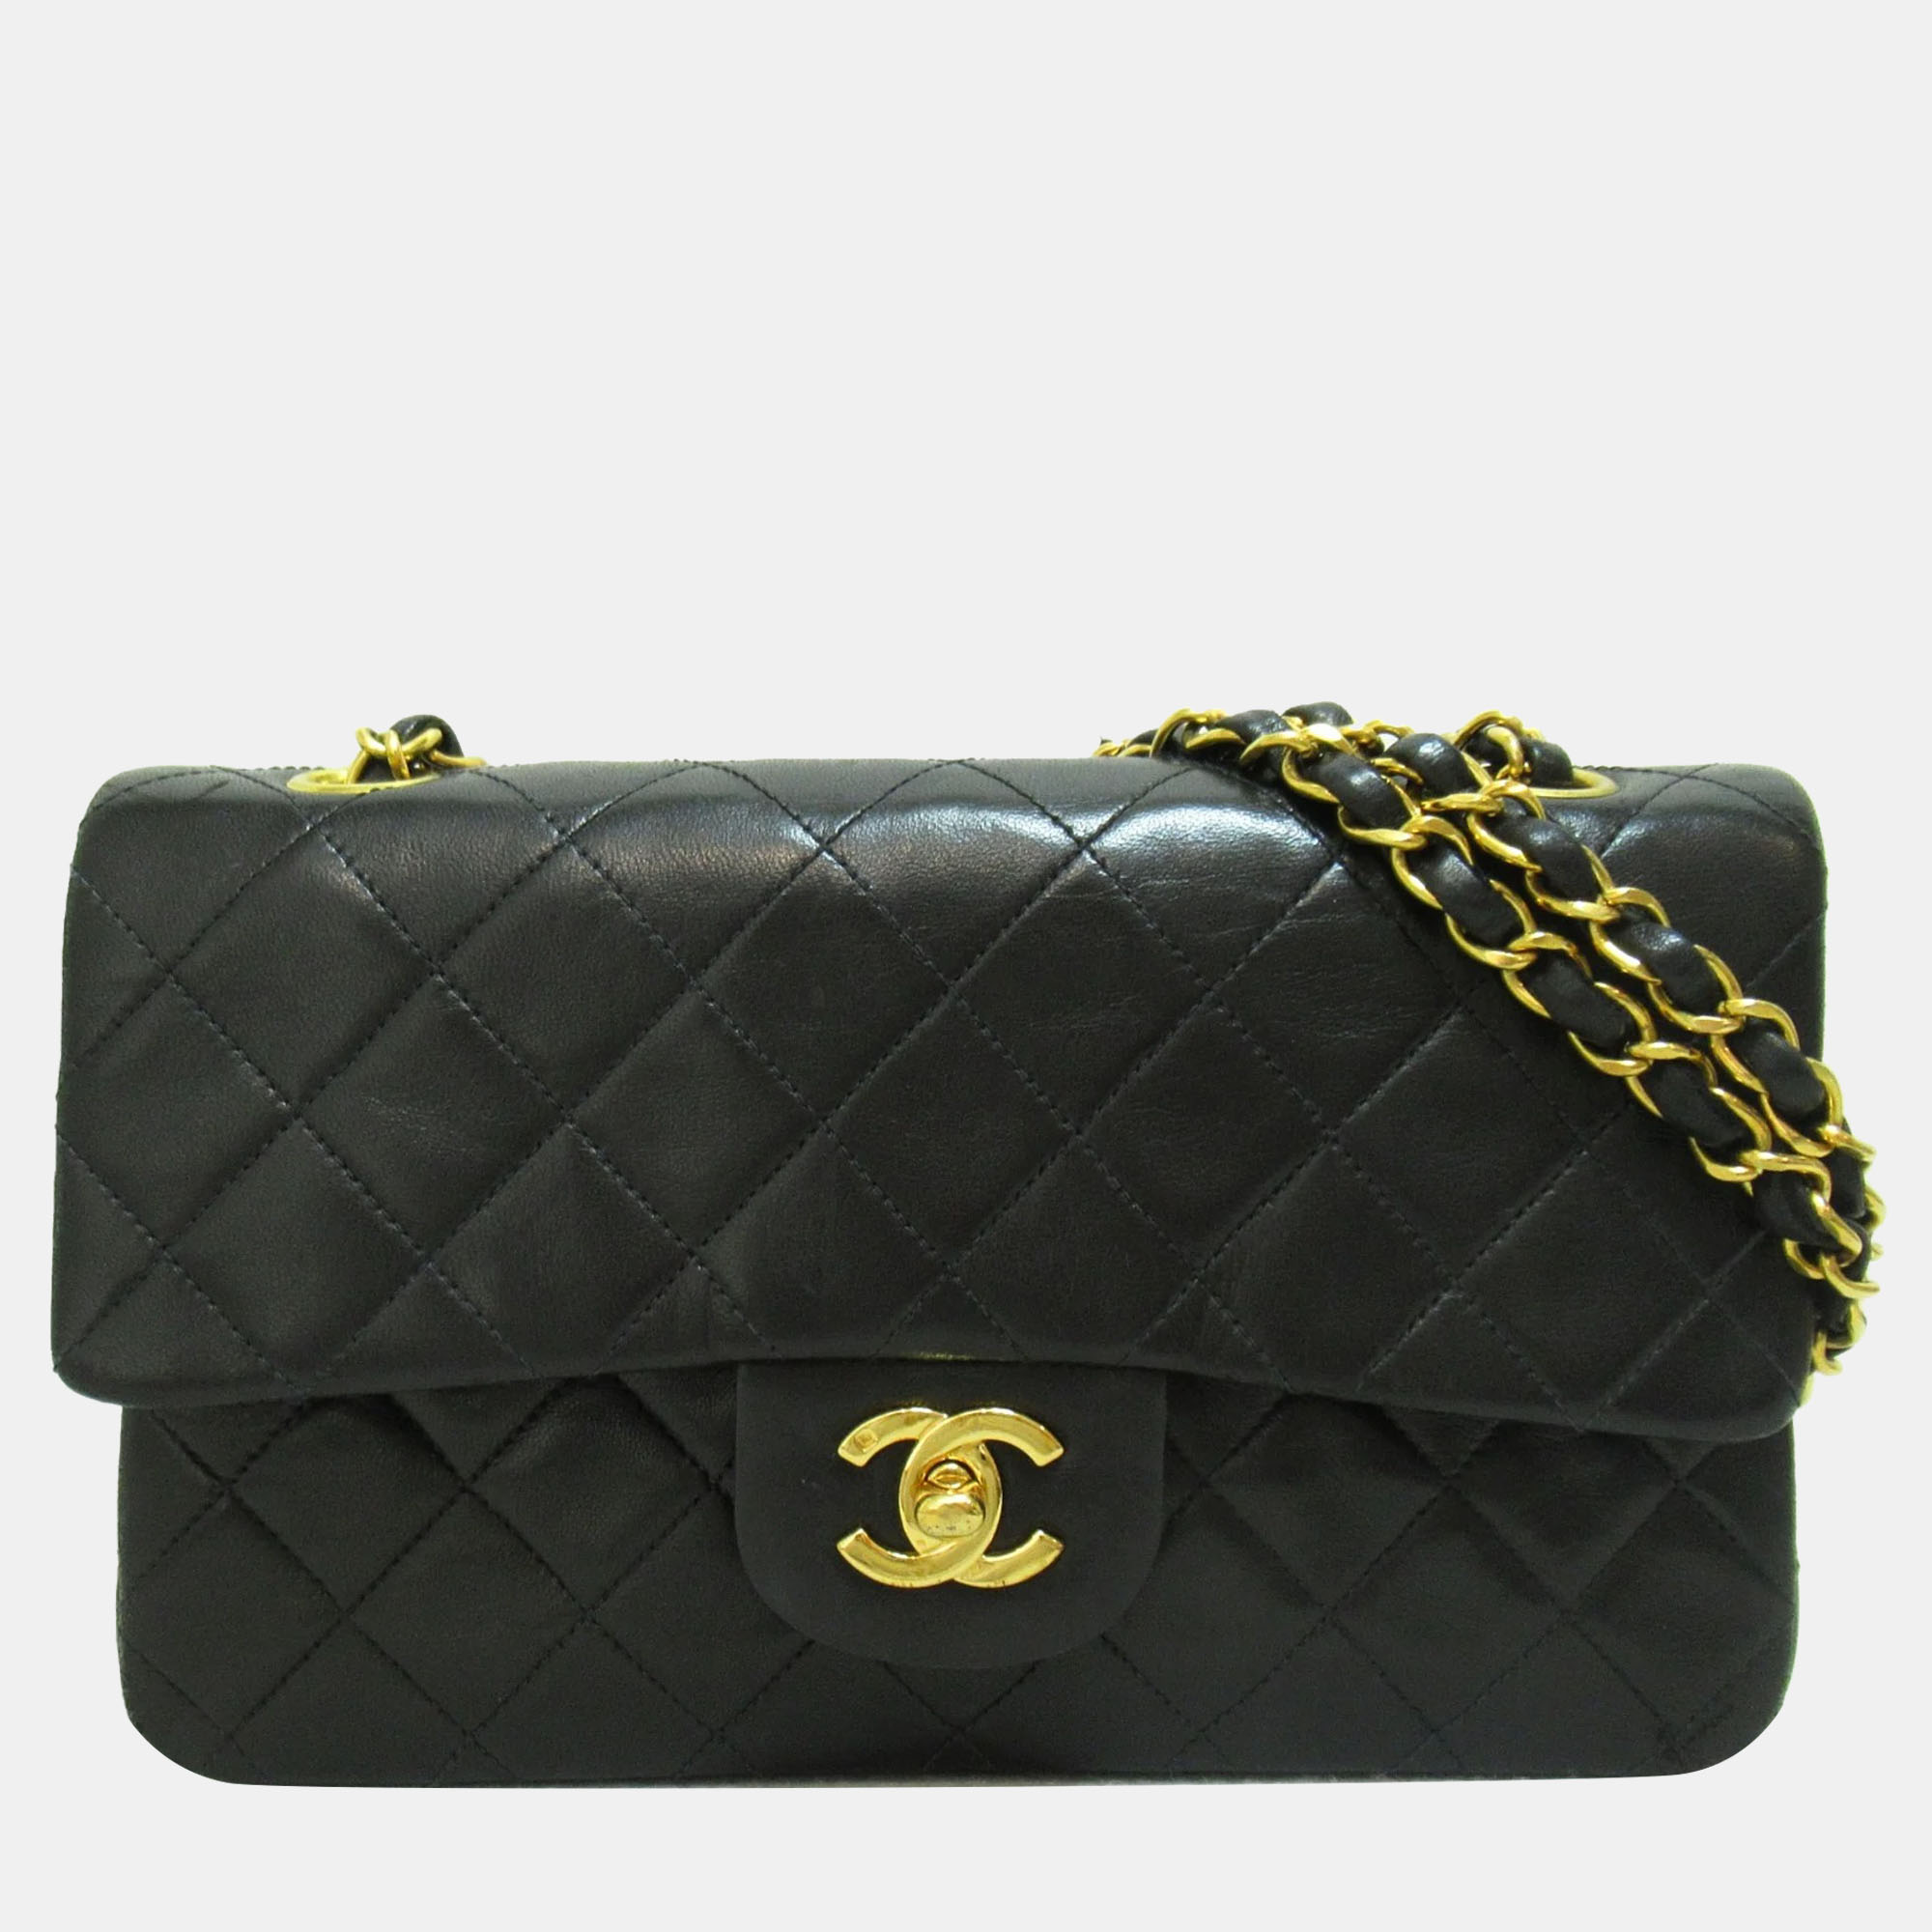 Experience luxury with this Chanel shoulder bag. Meticulously crafted with the best materials its a timeless piece that will elevate any outfit.